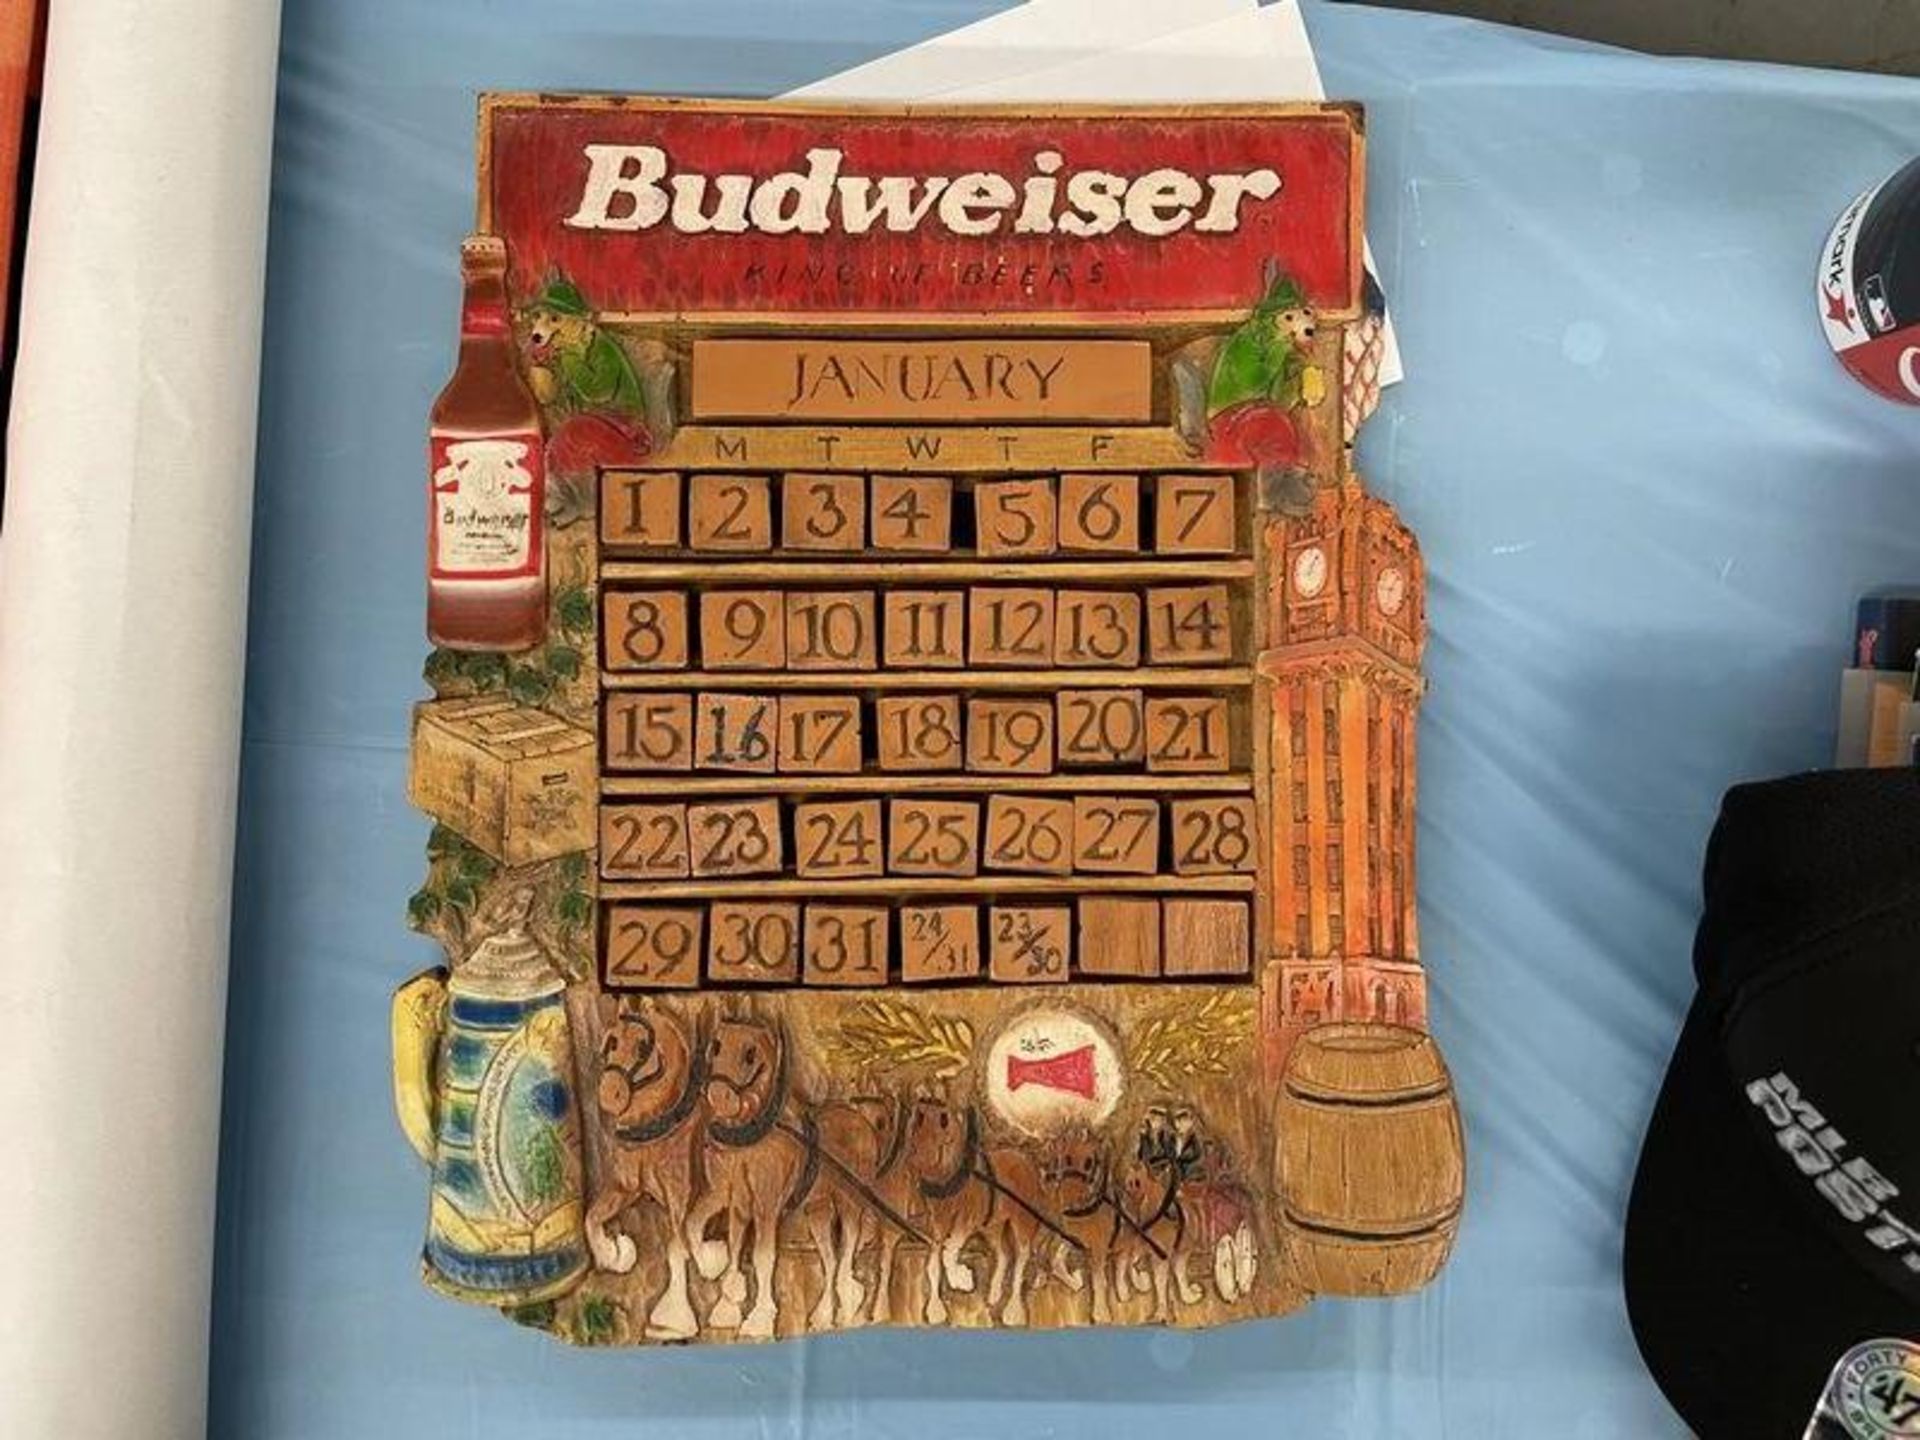 (Lot) Budweiser Engraved Calendar w/ Velcro Numbers and Months